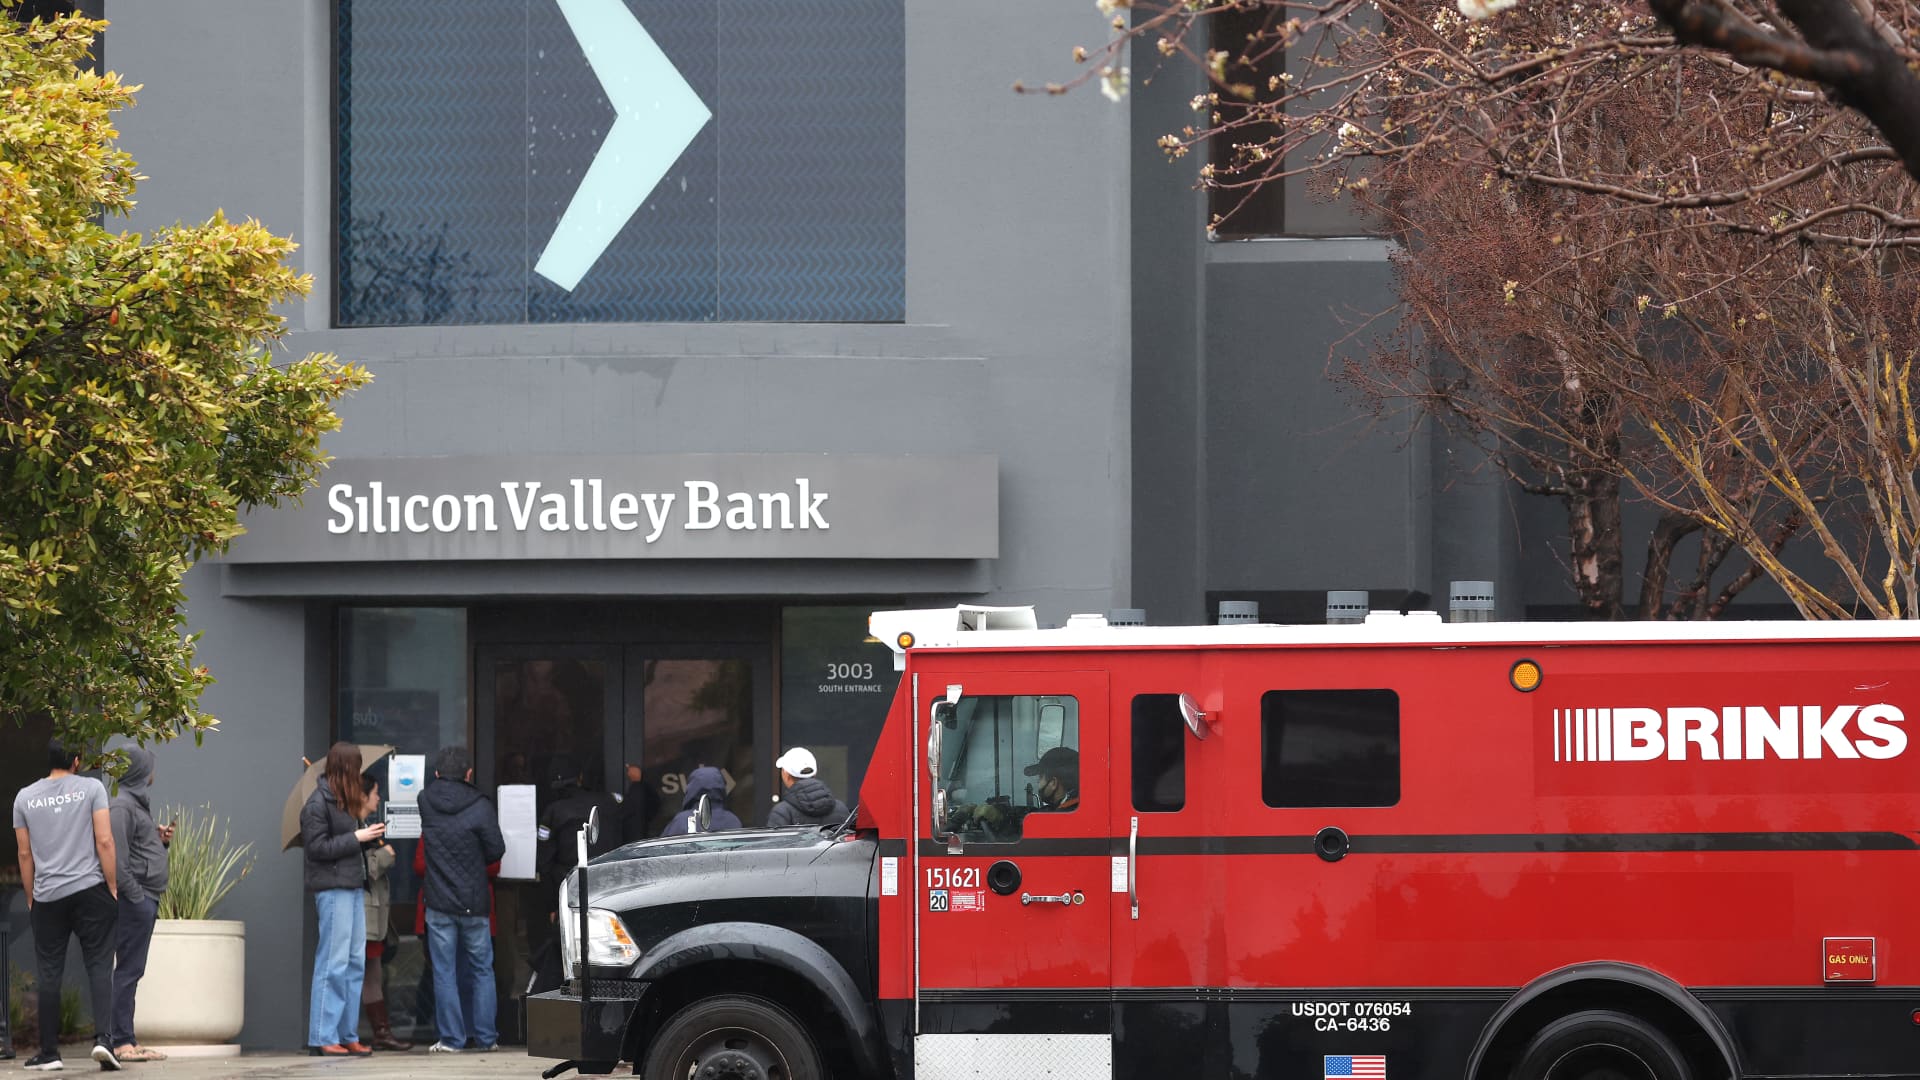 You have an elegant fix for the Silicon Valley Bank crisis